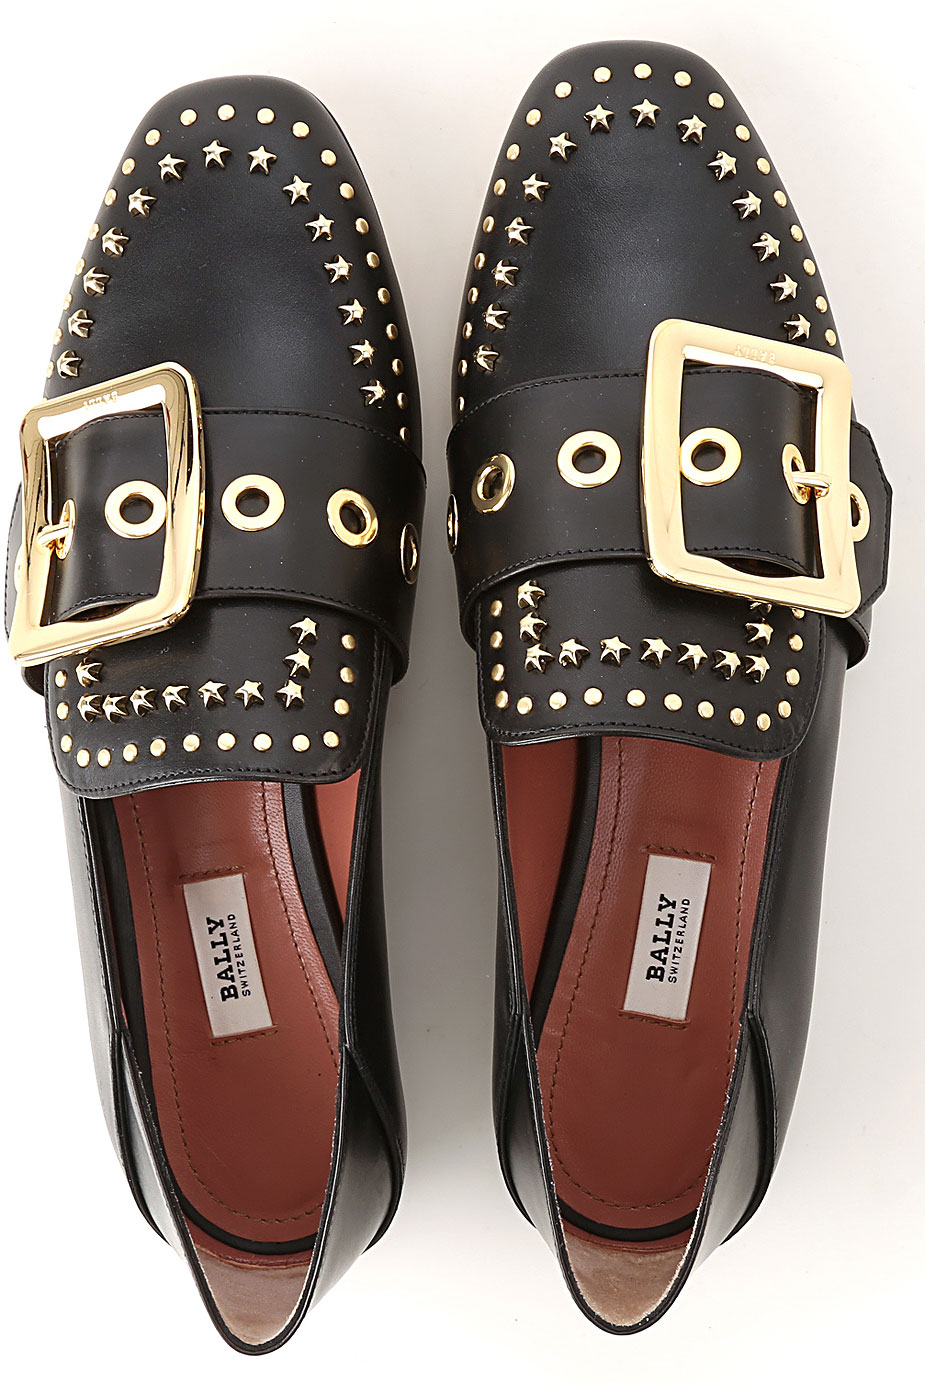 Womens Shoes Bally, Style code: janelle-suzy-100